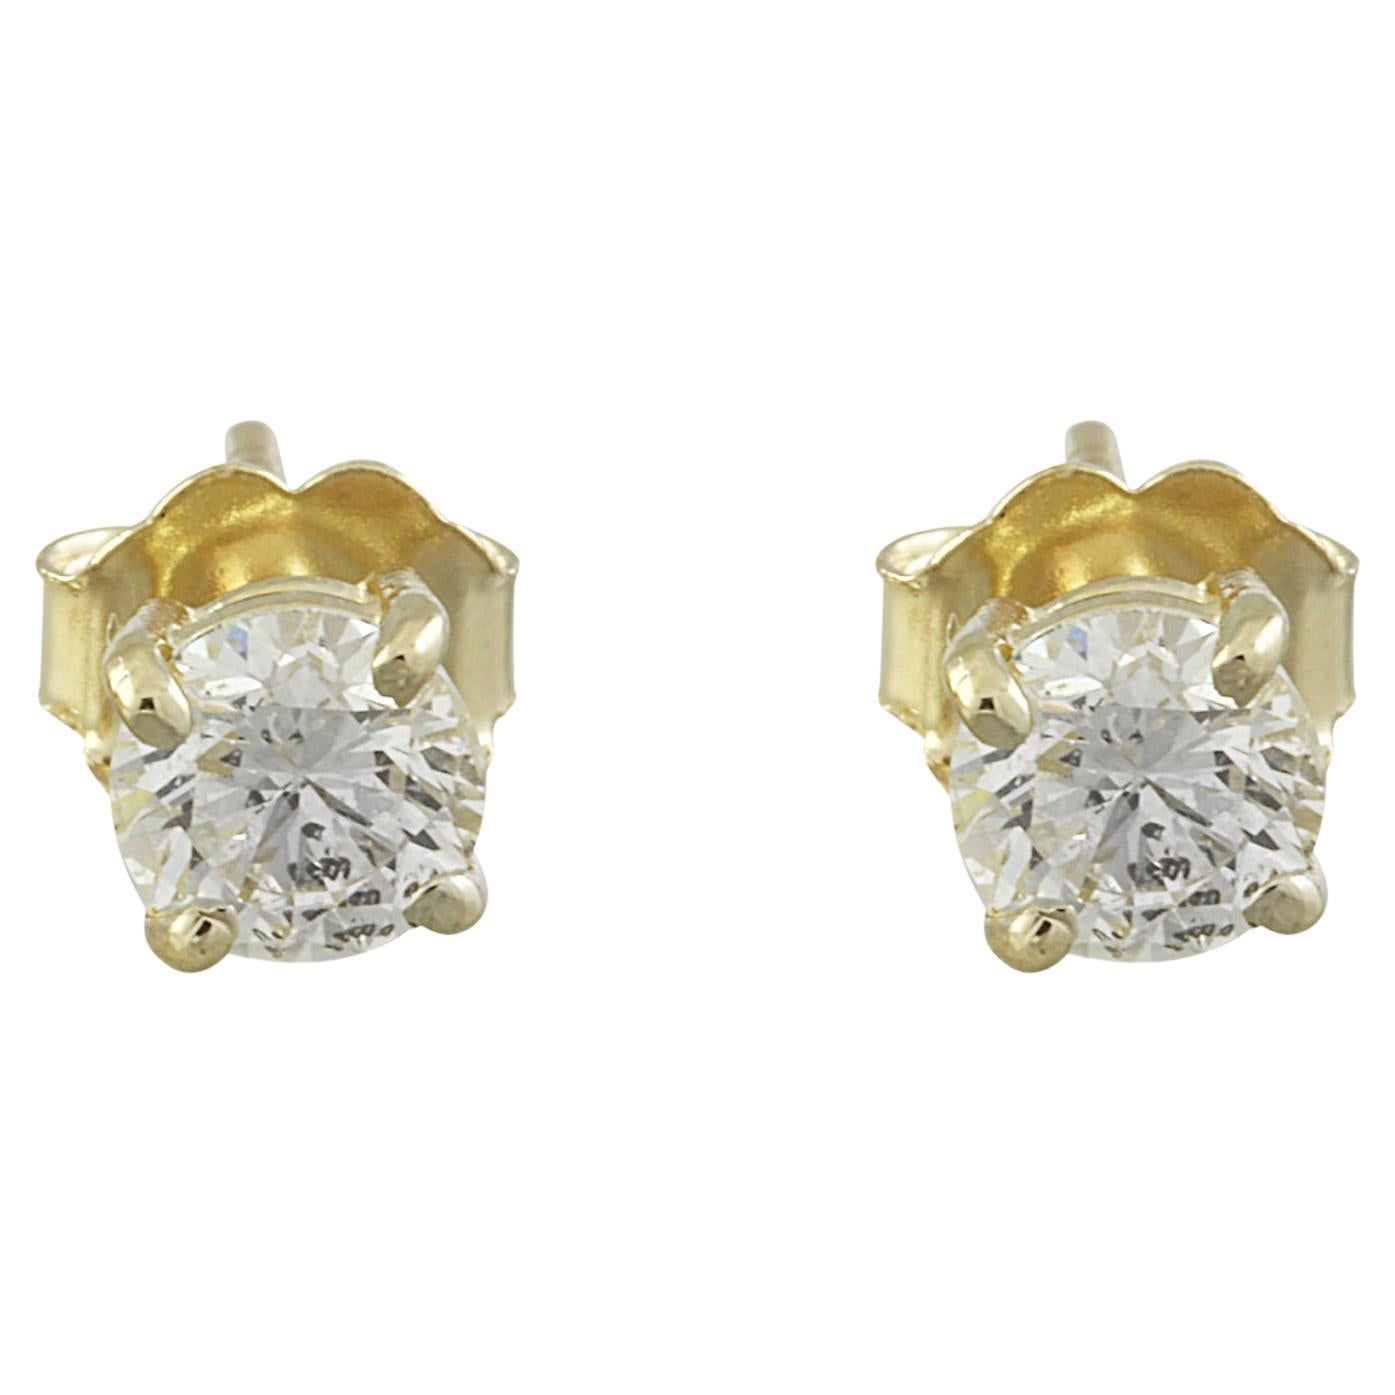 Exquisite 0.80 Carat Natural Diamond Stud Earrings In 14 Karat Yellow Gold  For Sale